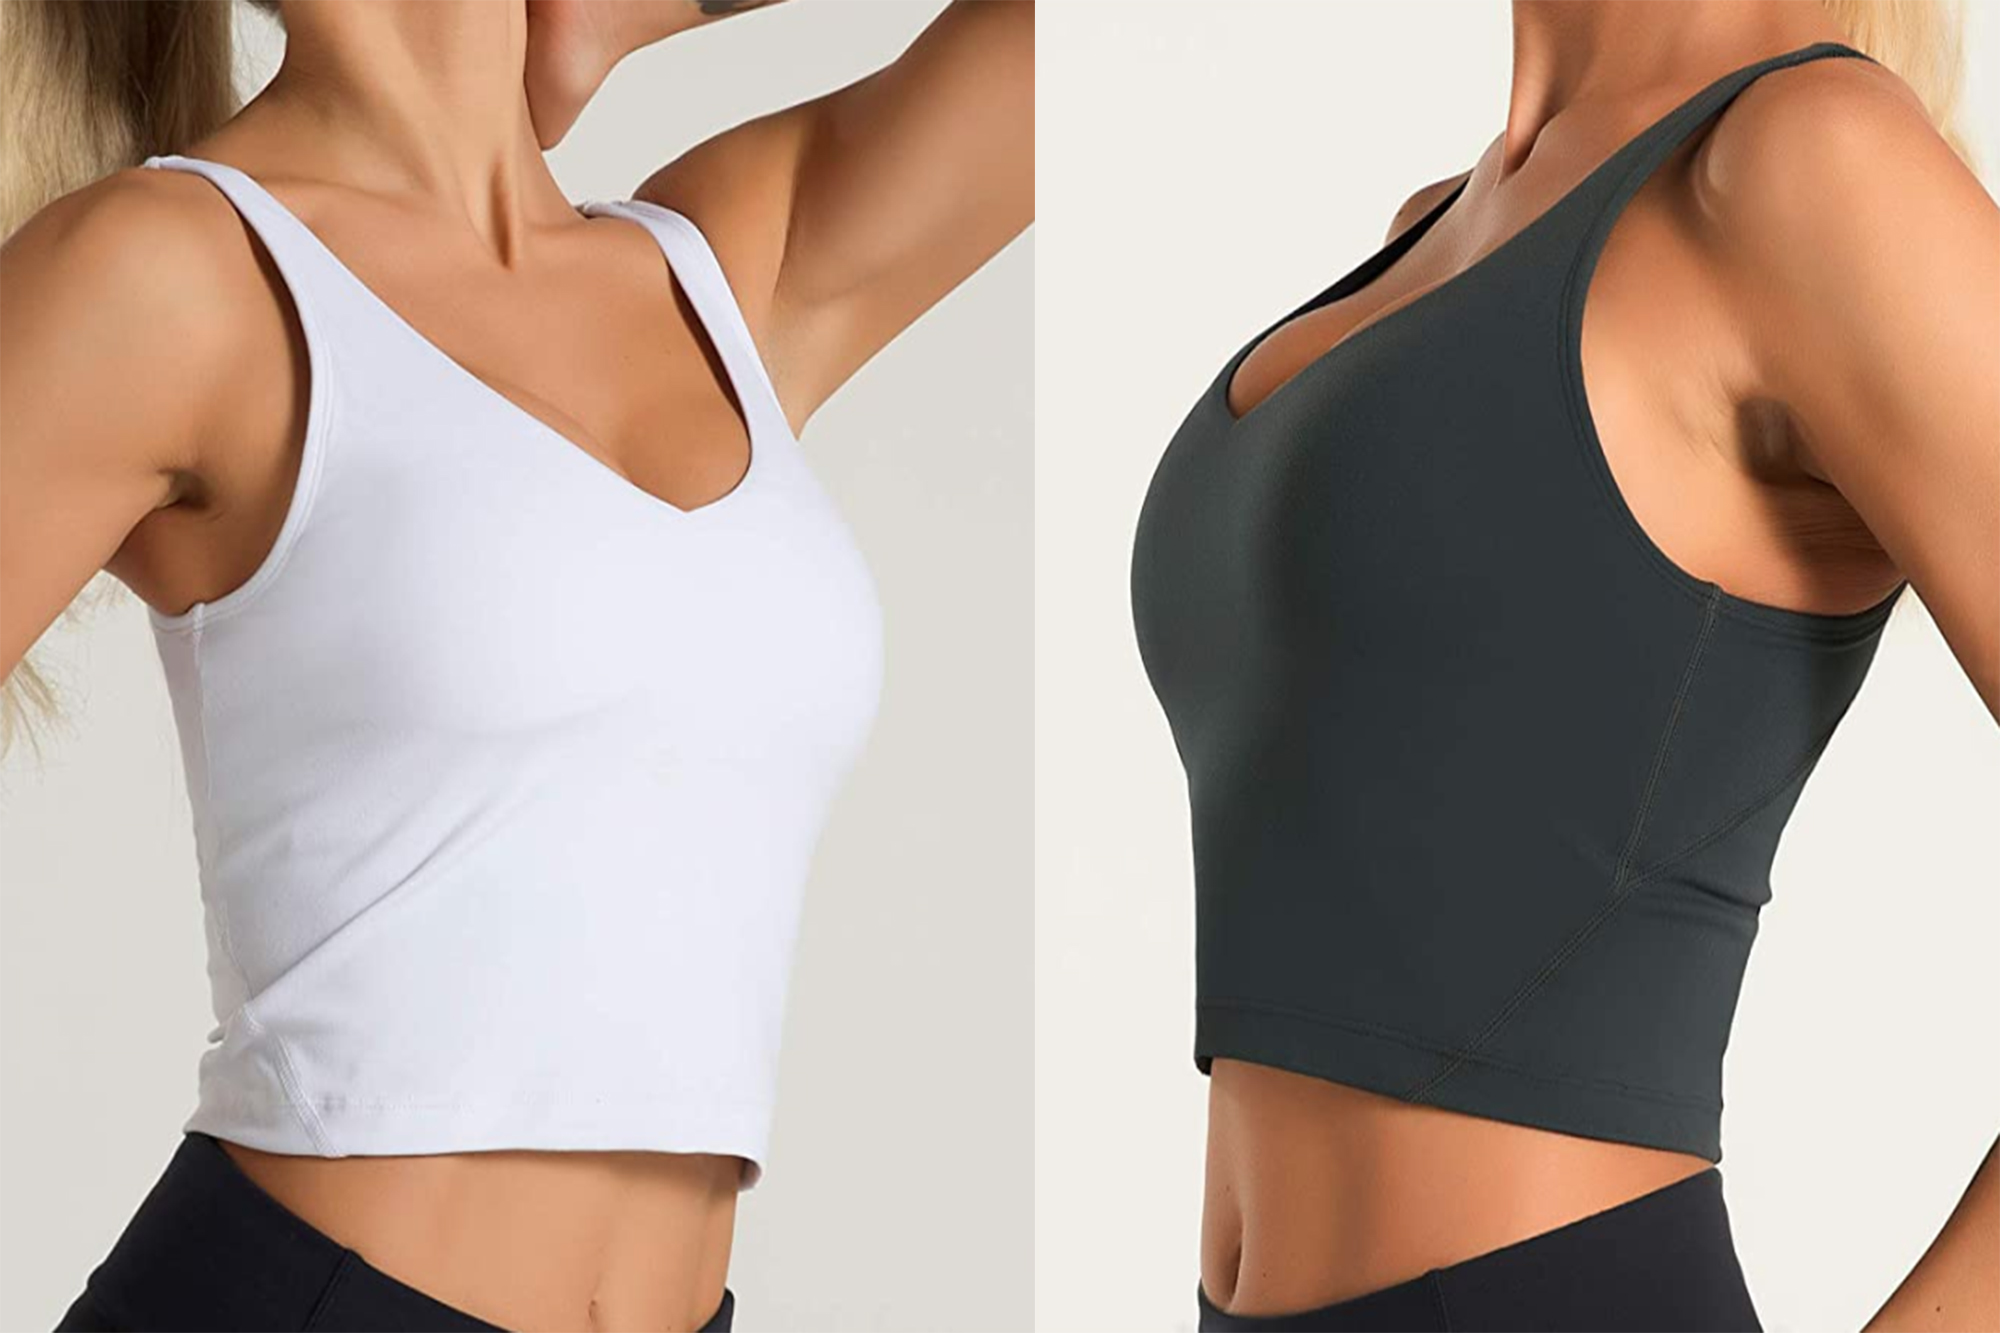 Alo Yoga tank bra lookalike from . Not impressed by the